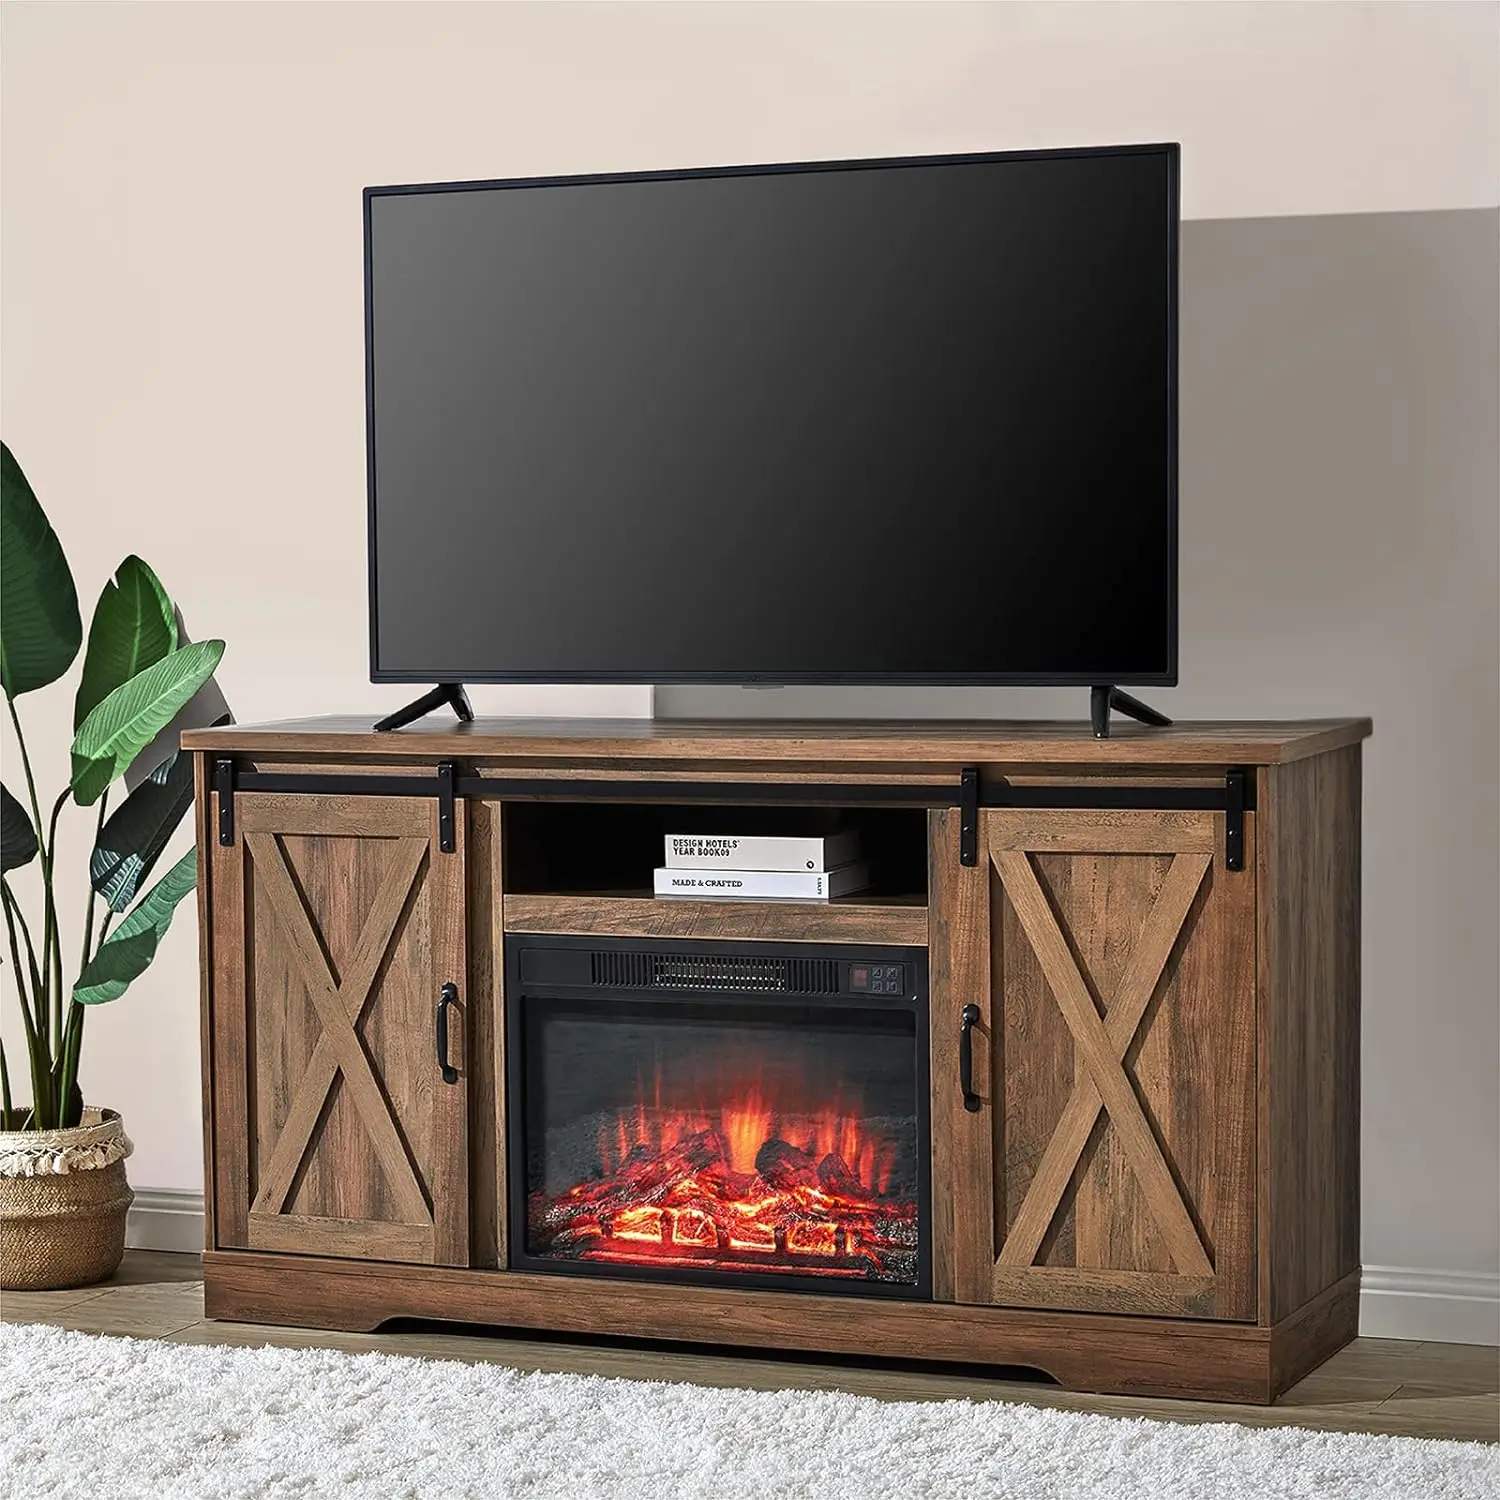 

Fireplace TV Stand with Sliding Barn Door, Farmhouse Fireplace Entertainment Center with Storage Cabinets/Adjustable Shelves